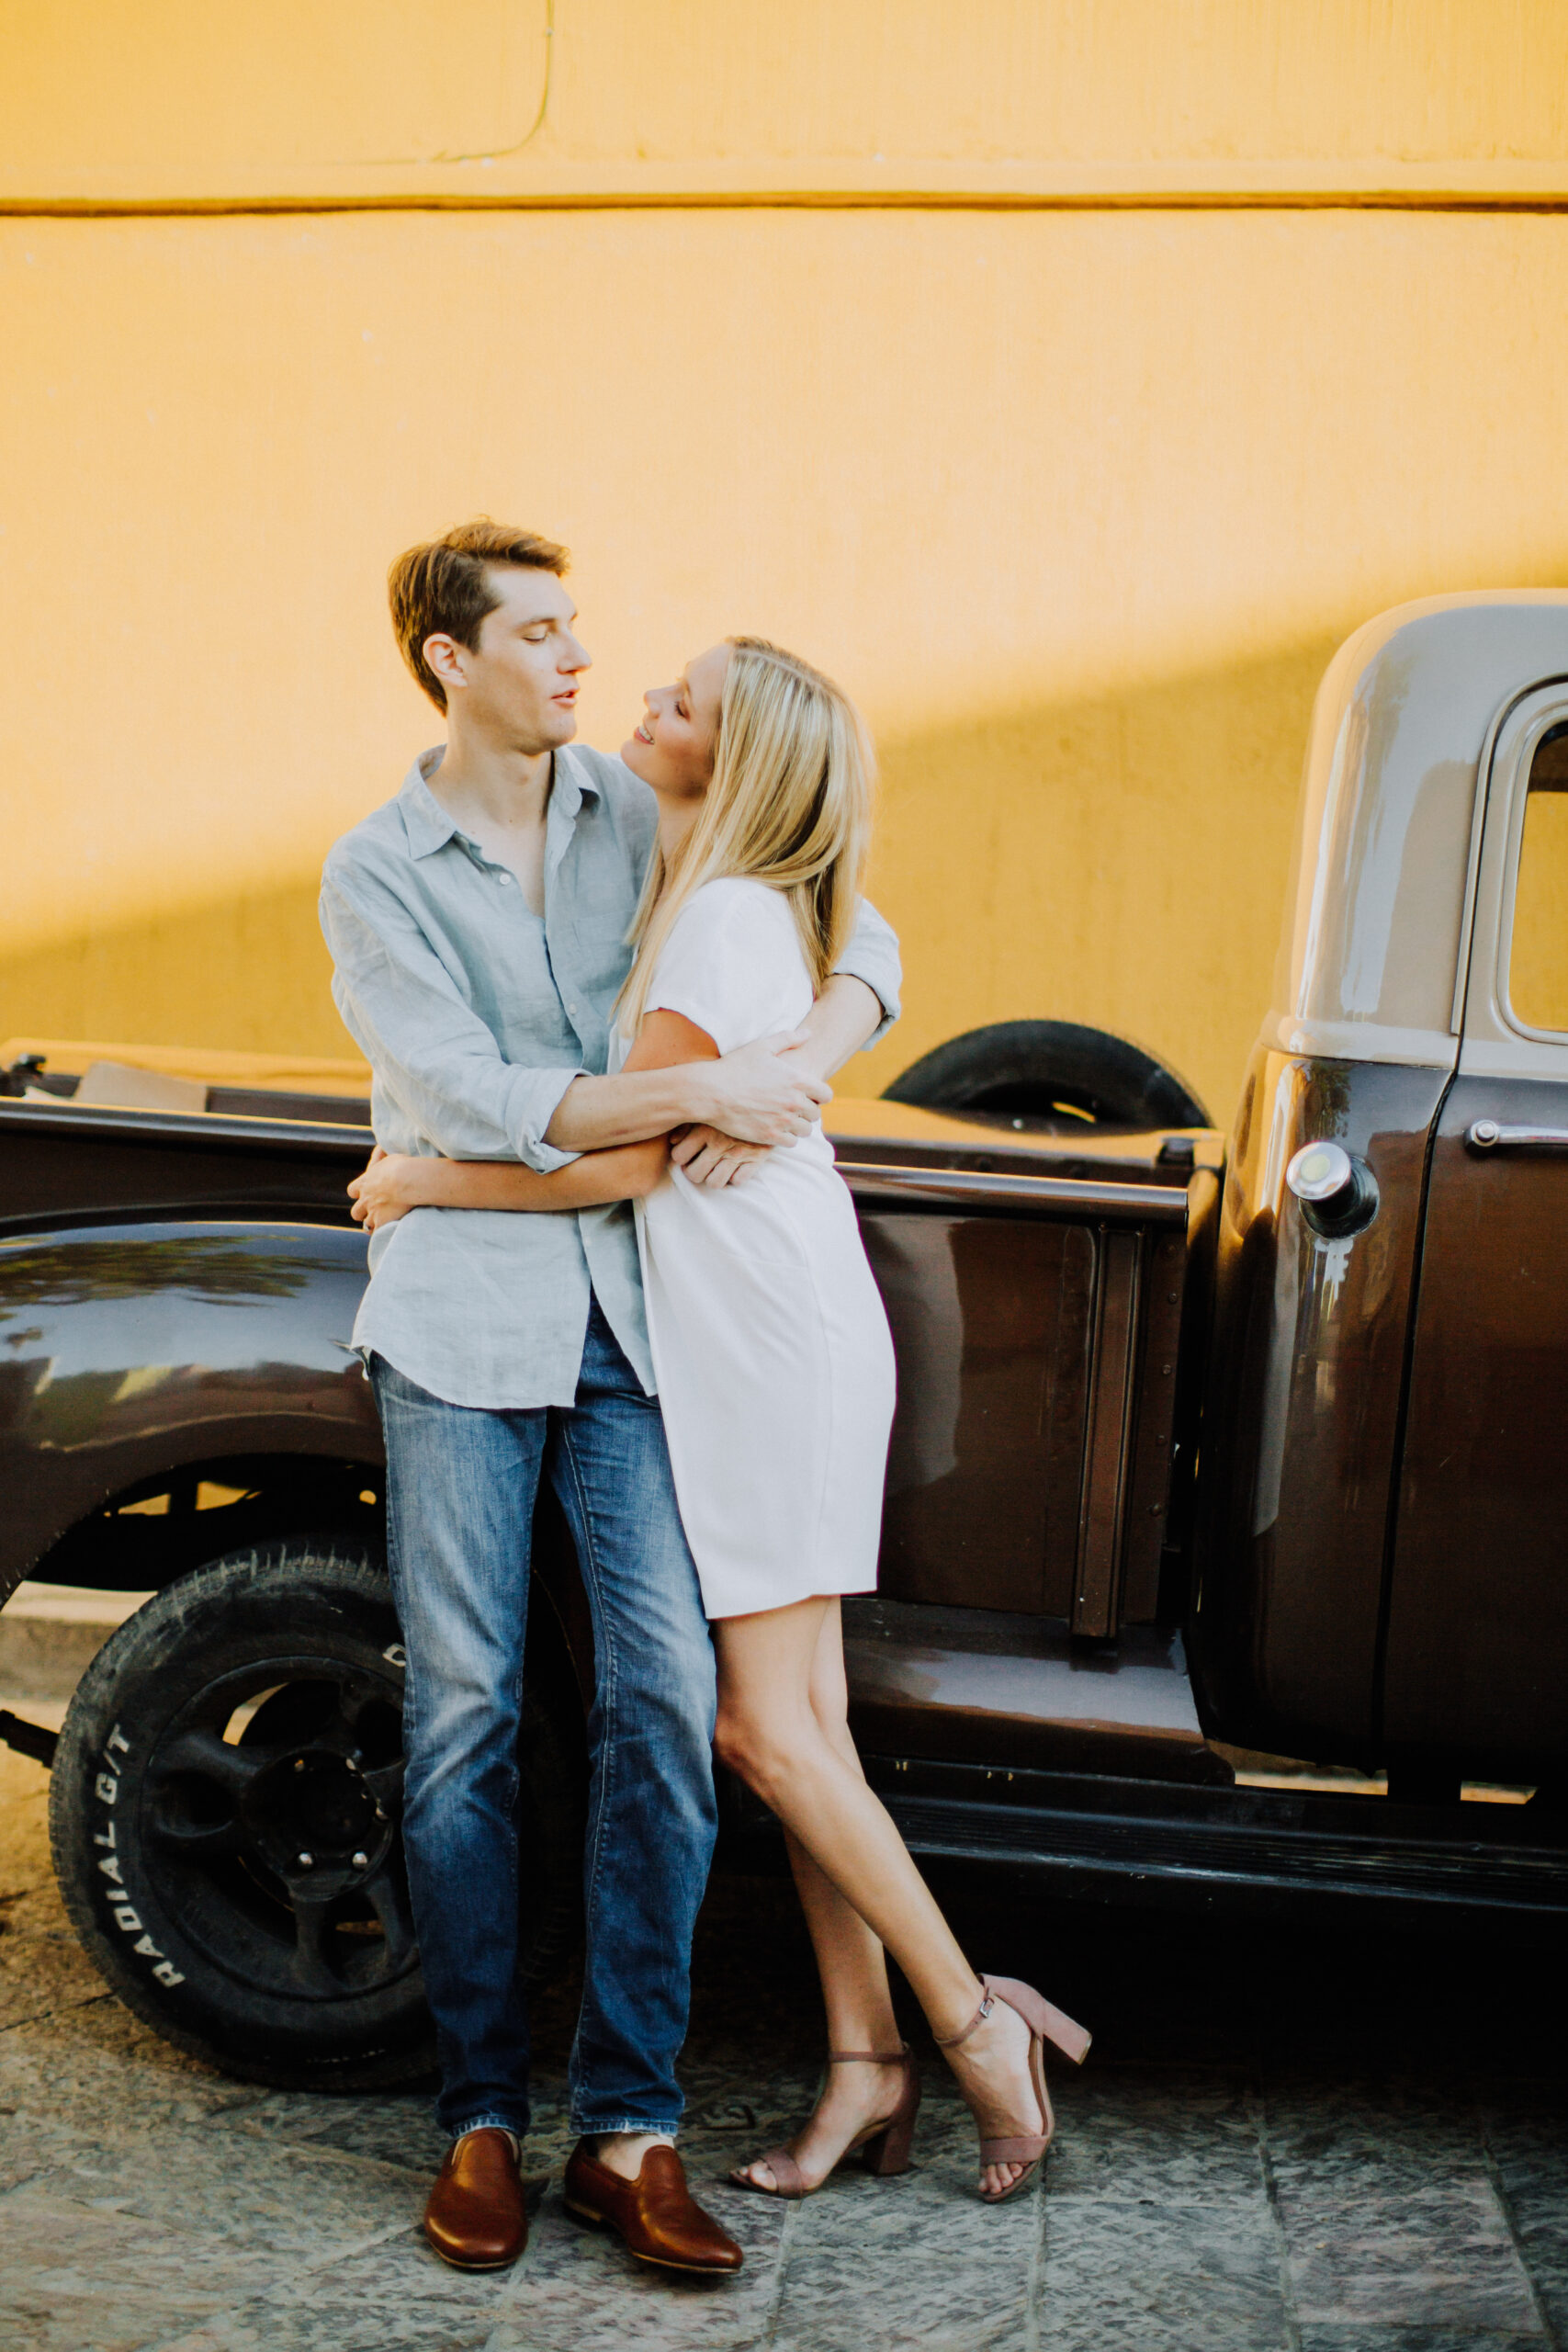 dreamy couple poses with a classic truck against a bright yellow background